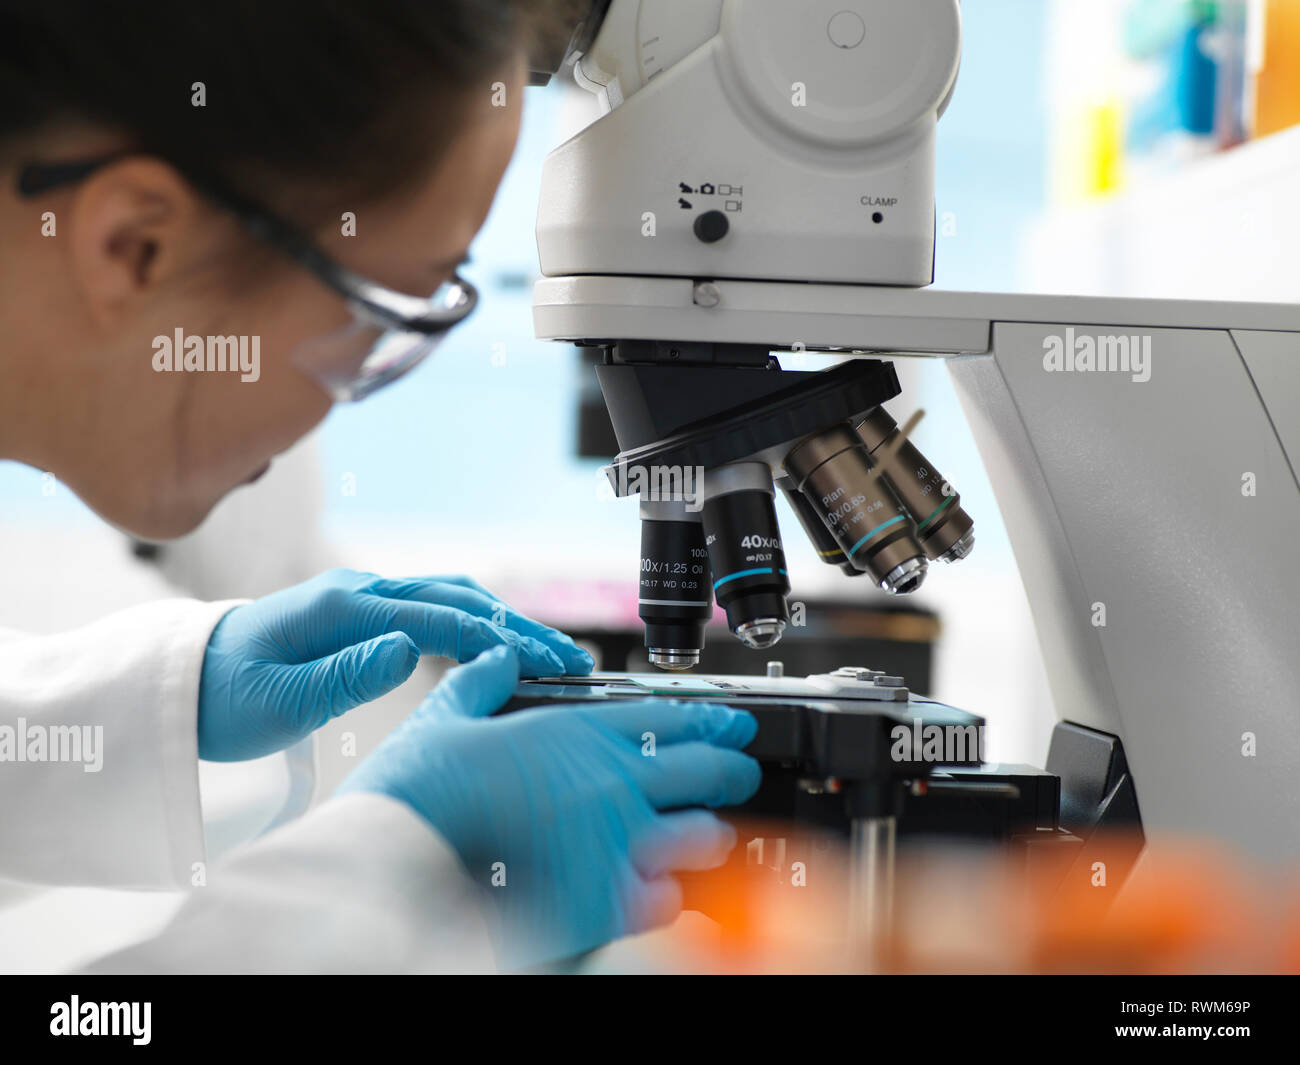 Scientist placing human sample on glass slide under microscope in laboratory Stock Photo